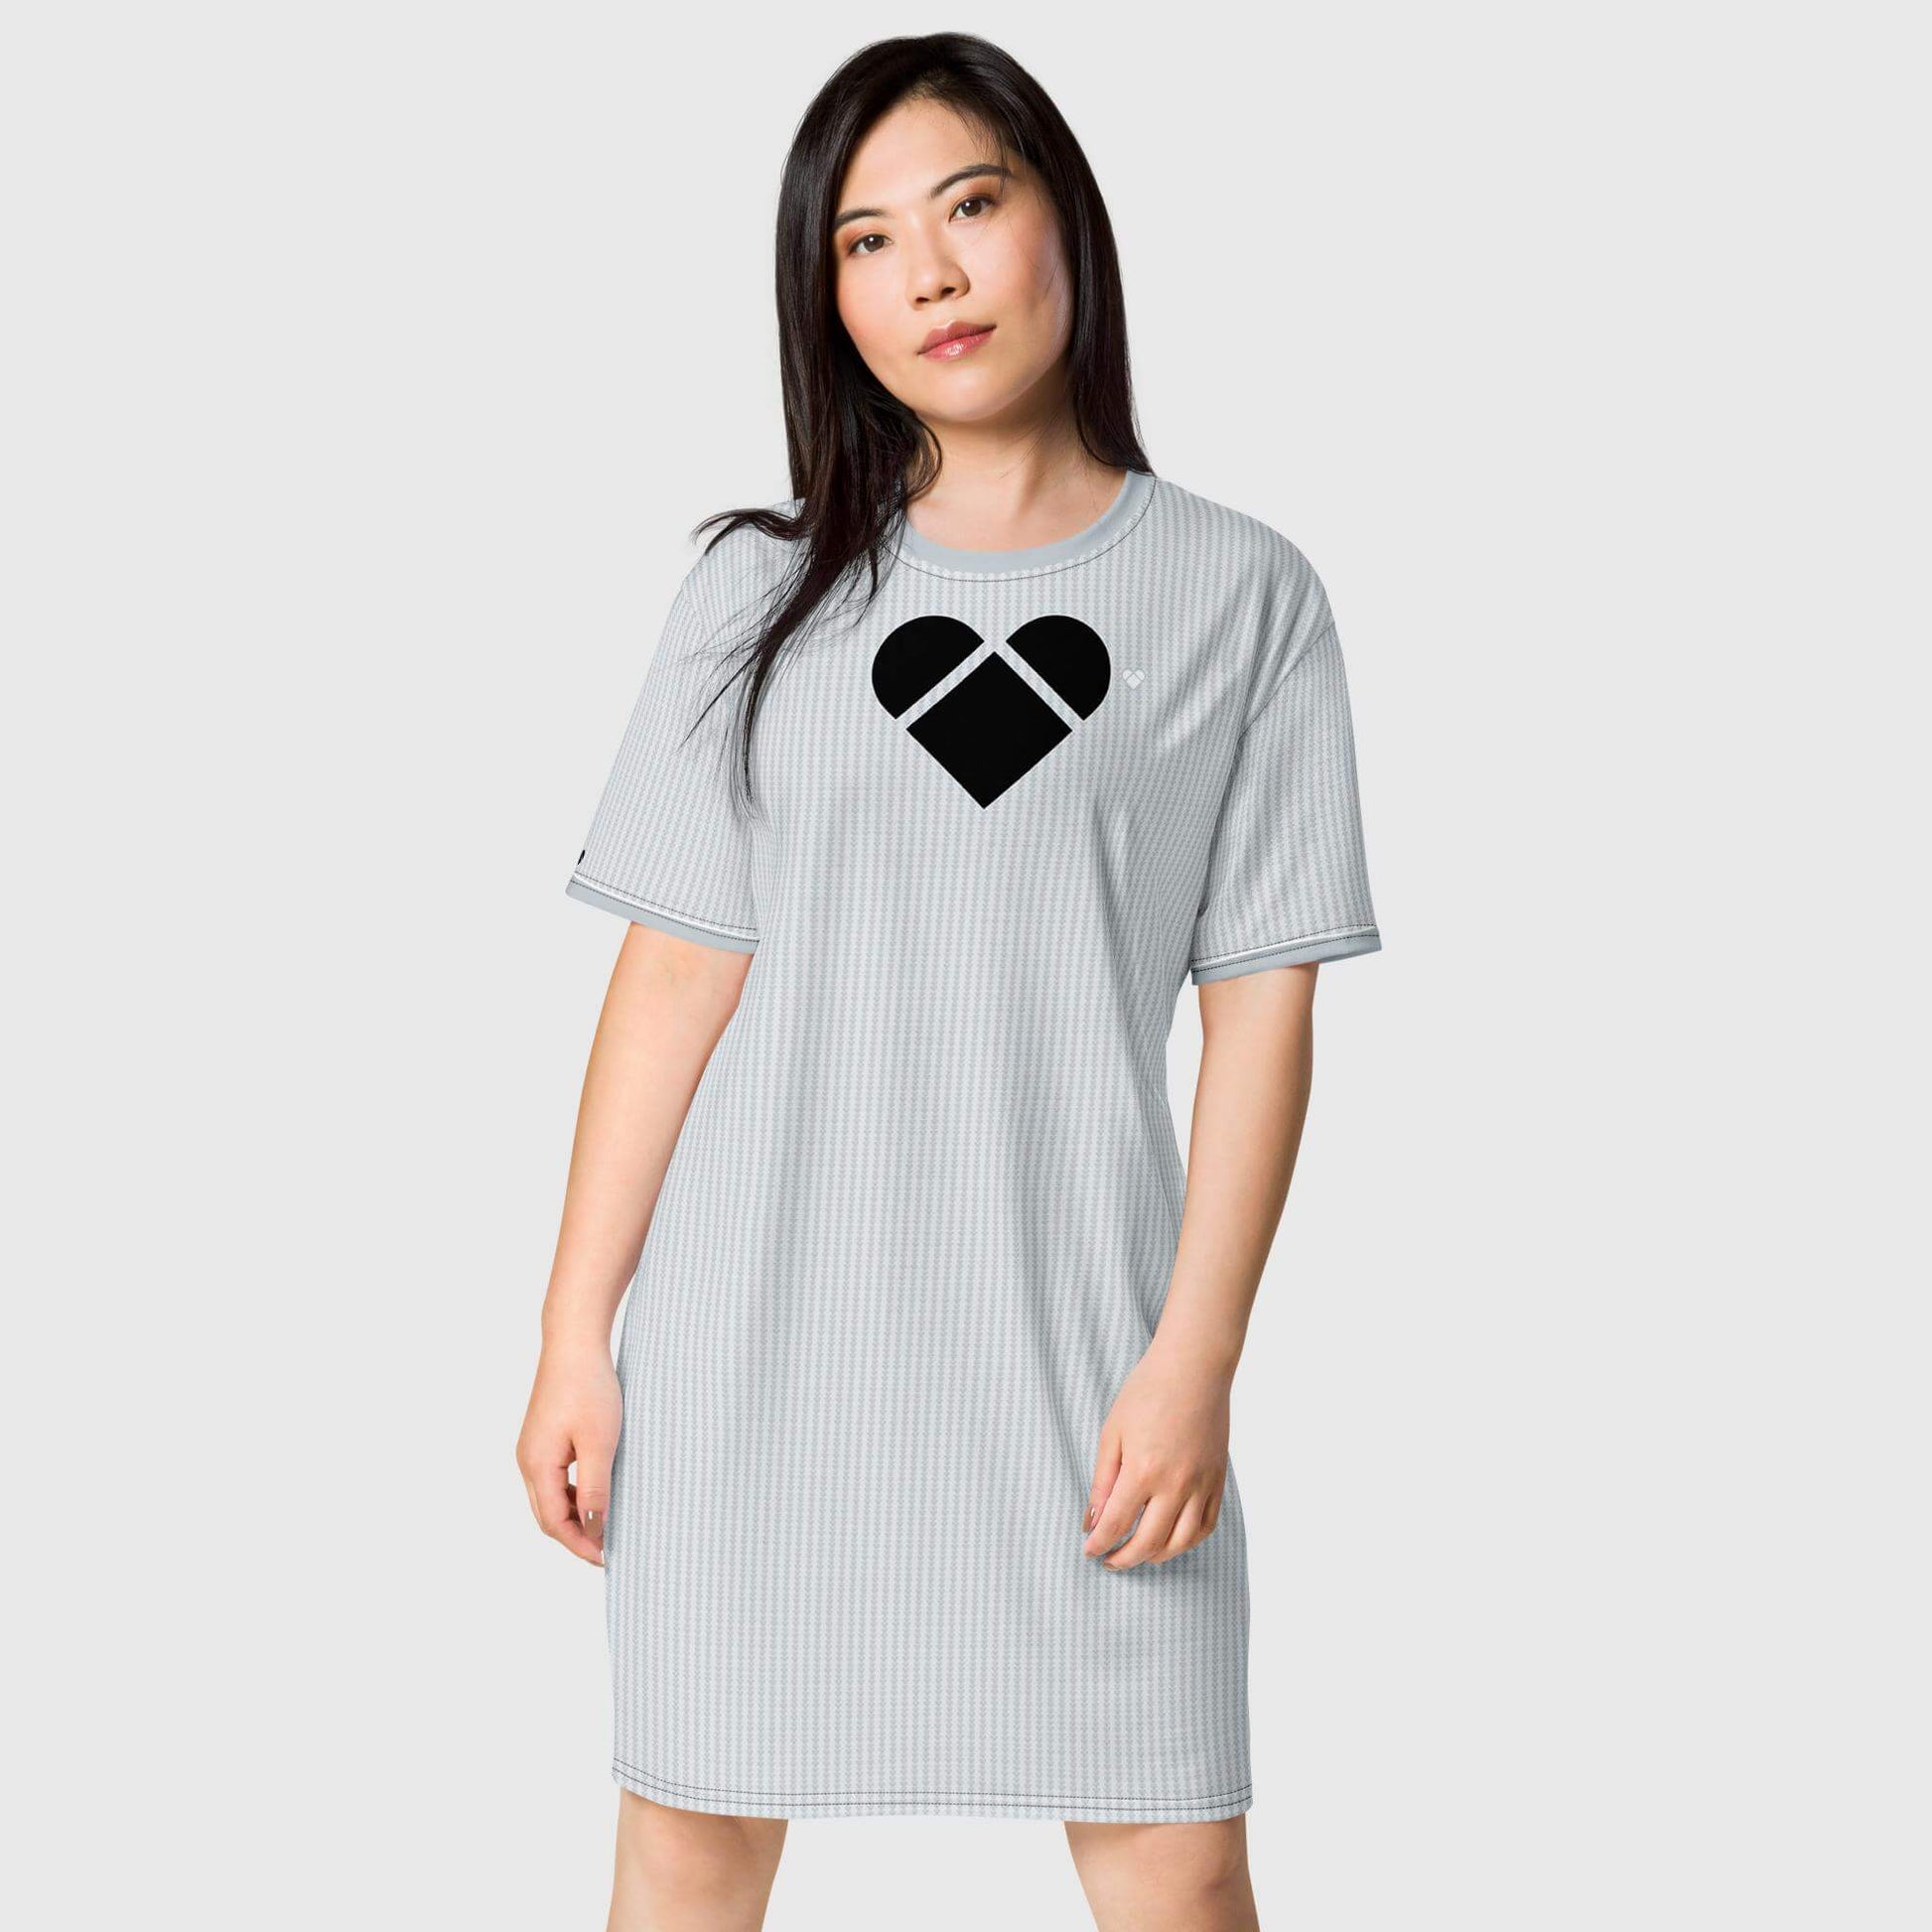 Empowered woman wearing light gray Lovogram Shirt Dress for self-expression by CRiZ AMOR 